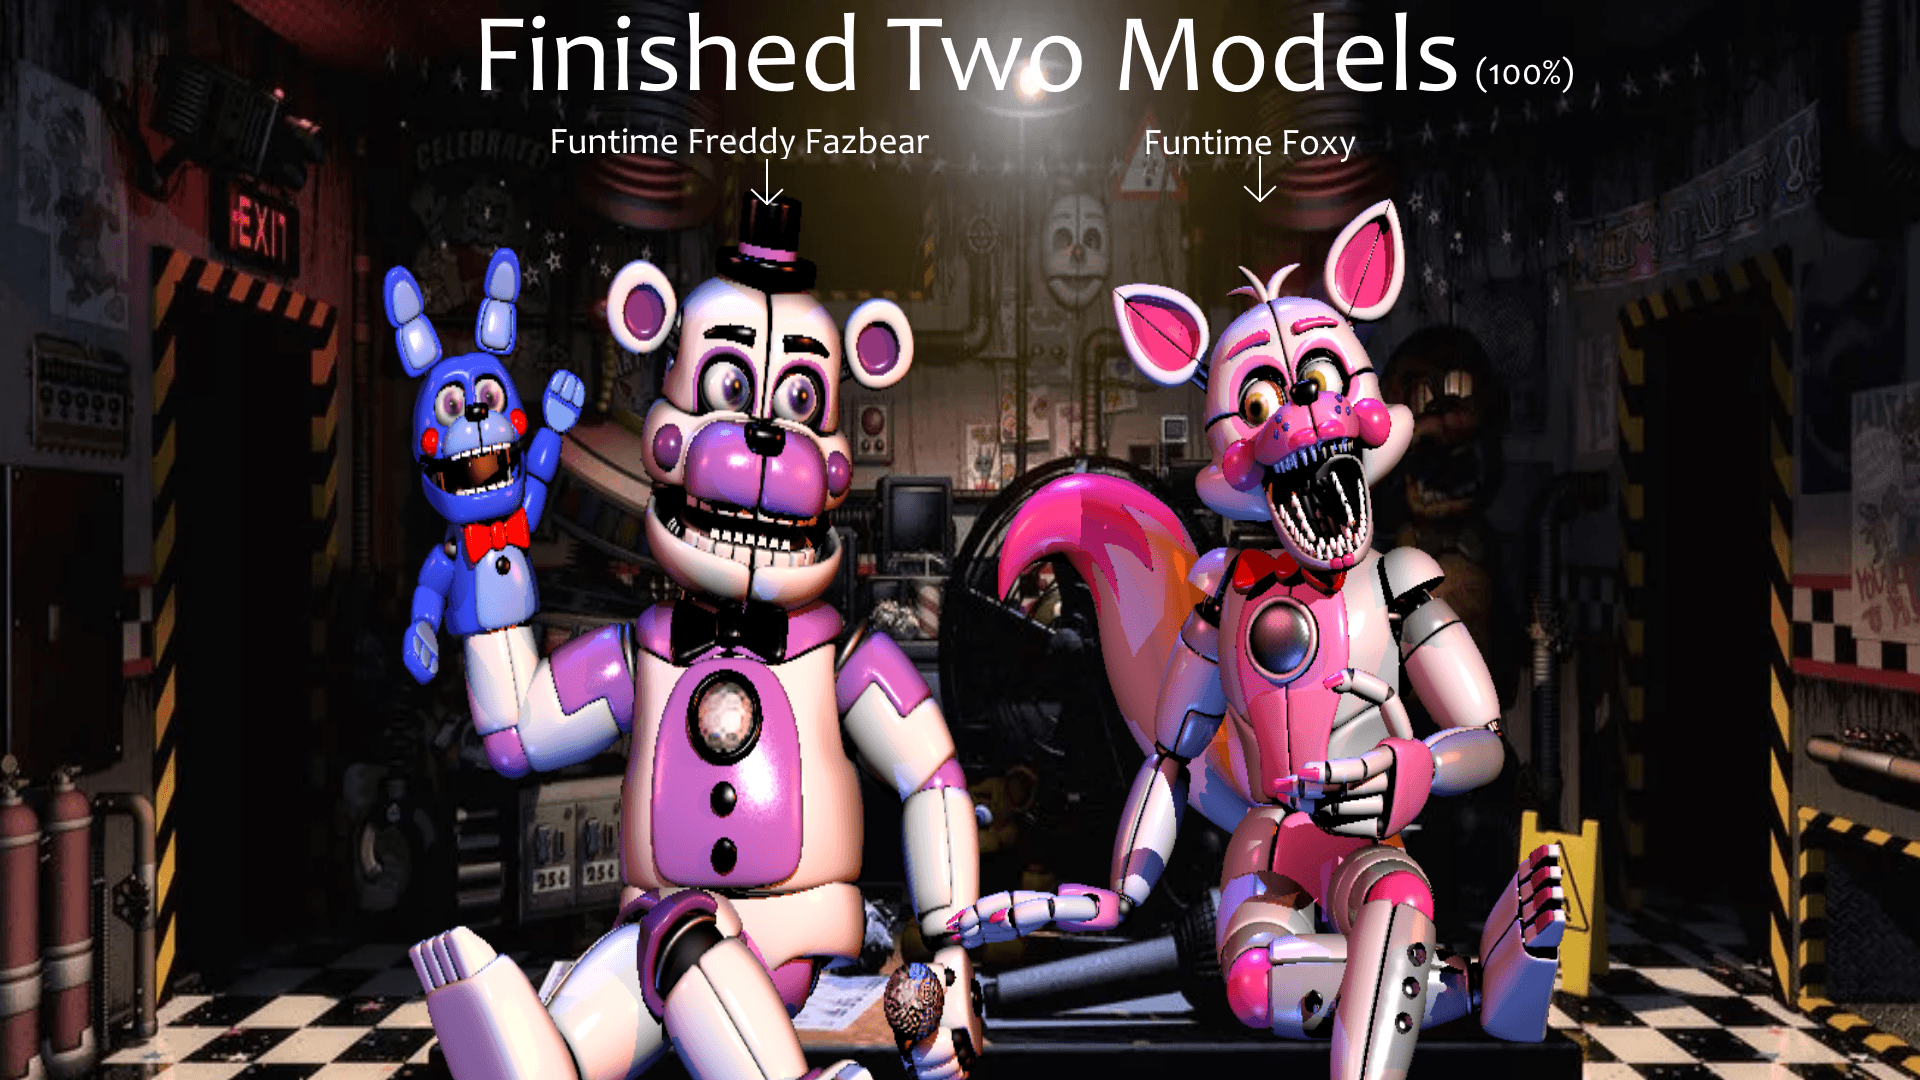 Finished two models:Funtime Freddy Fazbear and Funtime Foxy on Game Jolt